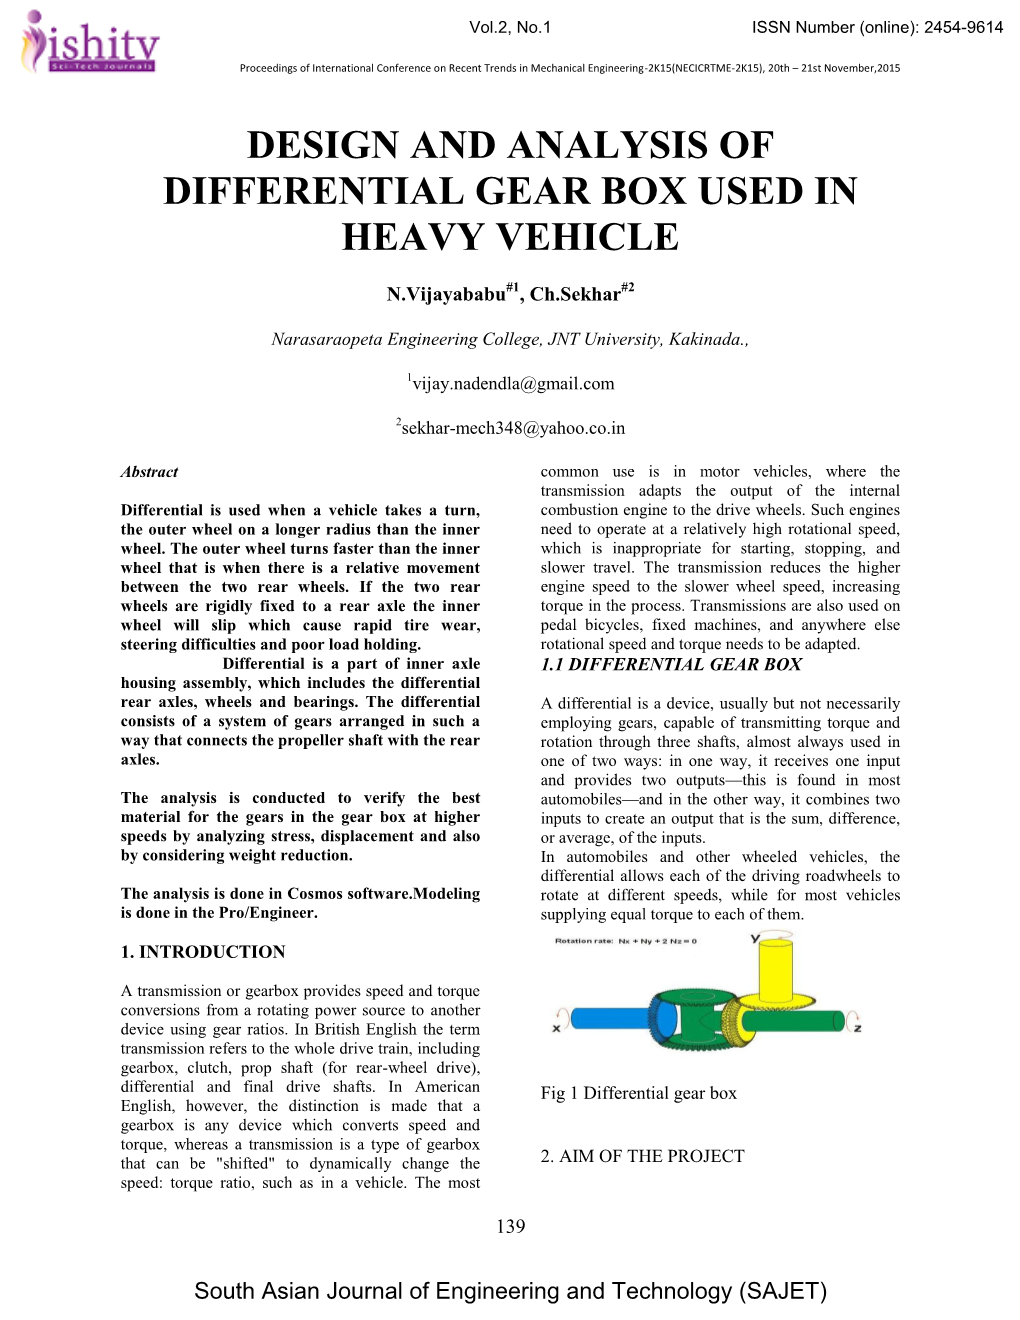 Design and Analysis of Differential Gear Box Used in Heavy Vehicle